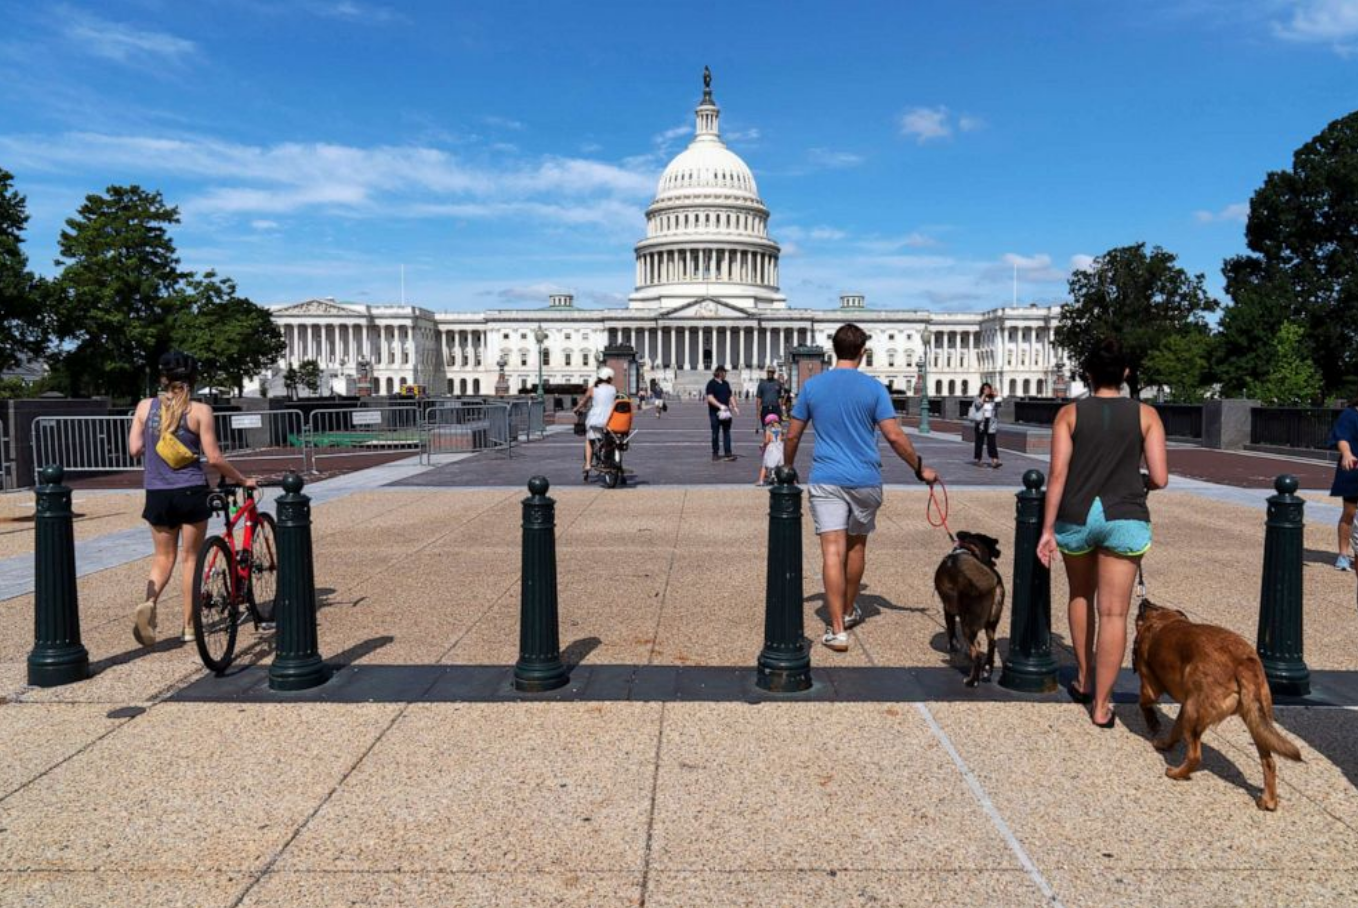 People walk to the U.S. Capitol after workers remove the fence surrounding the U.S. Capitol building, after six months of being erected following the Jan. 6 riot at the Capitol, July 10, 2021, in Washington. Jose Luis Magana/AP